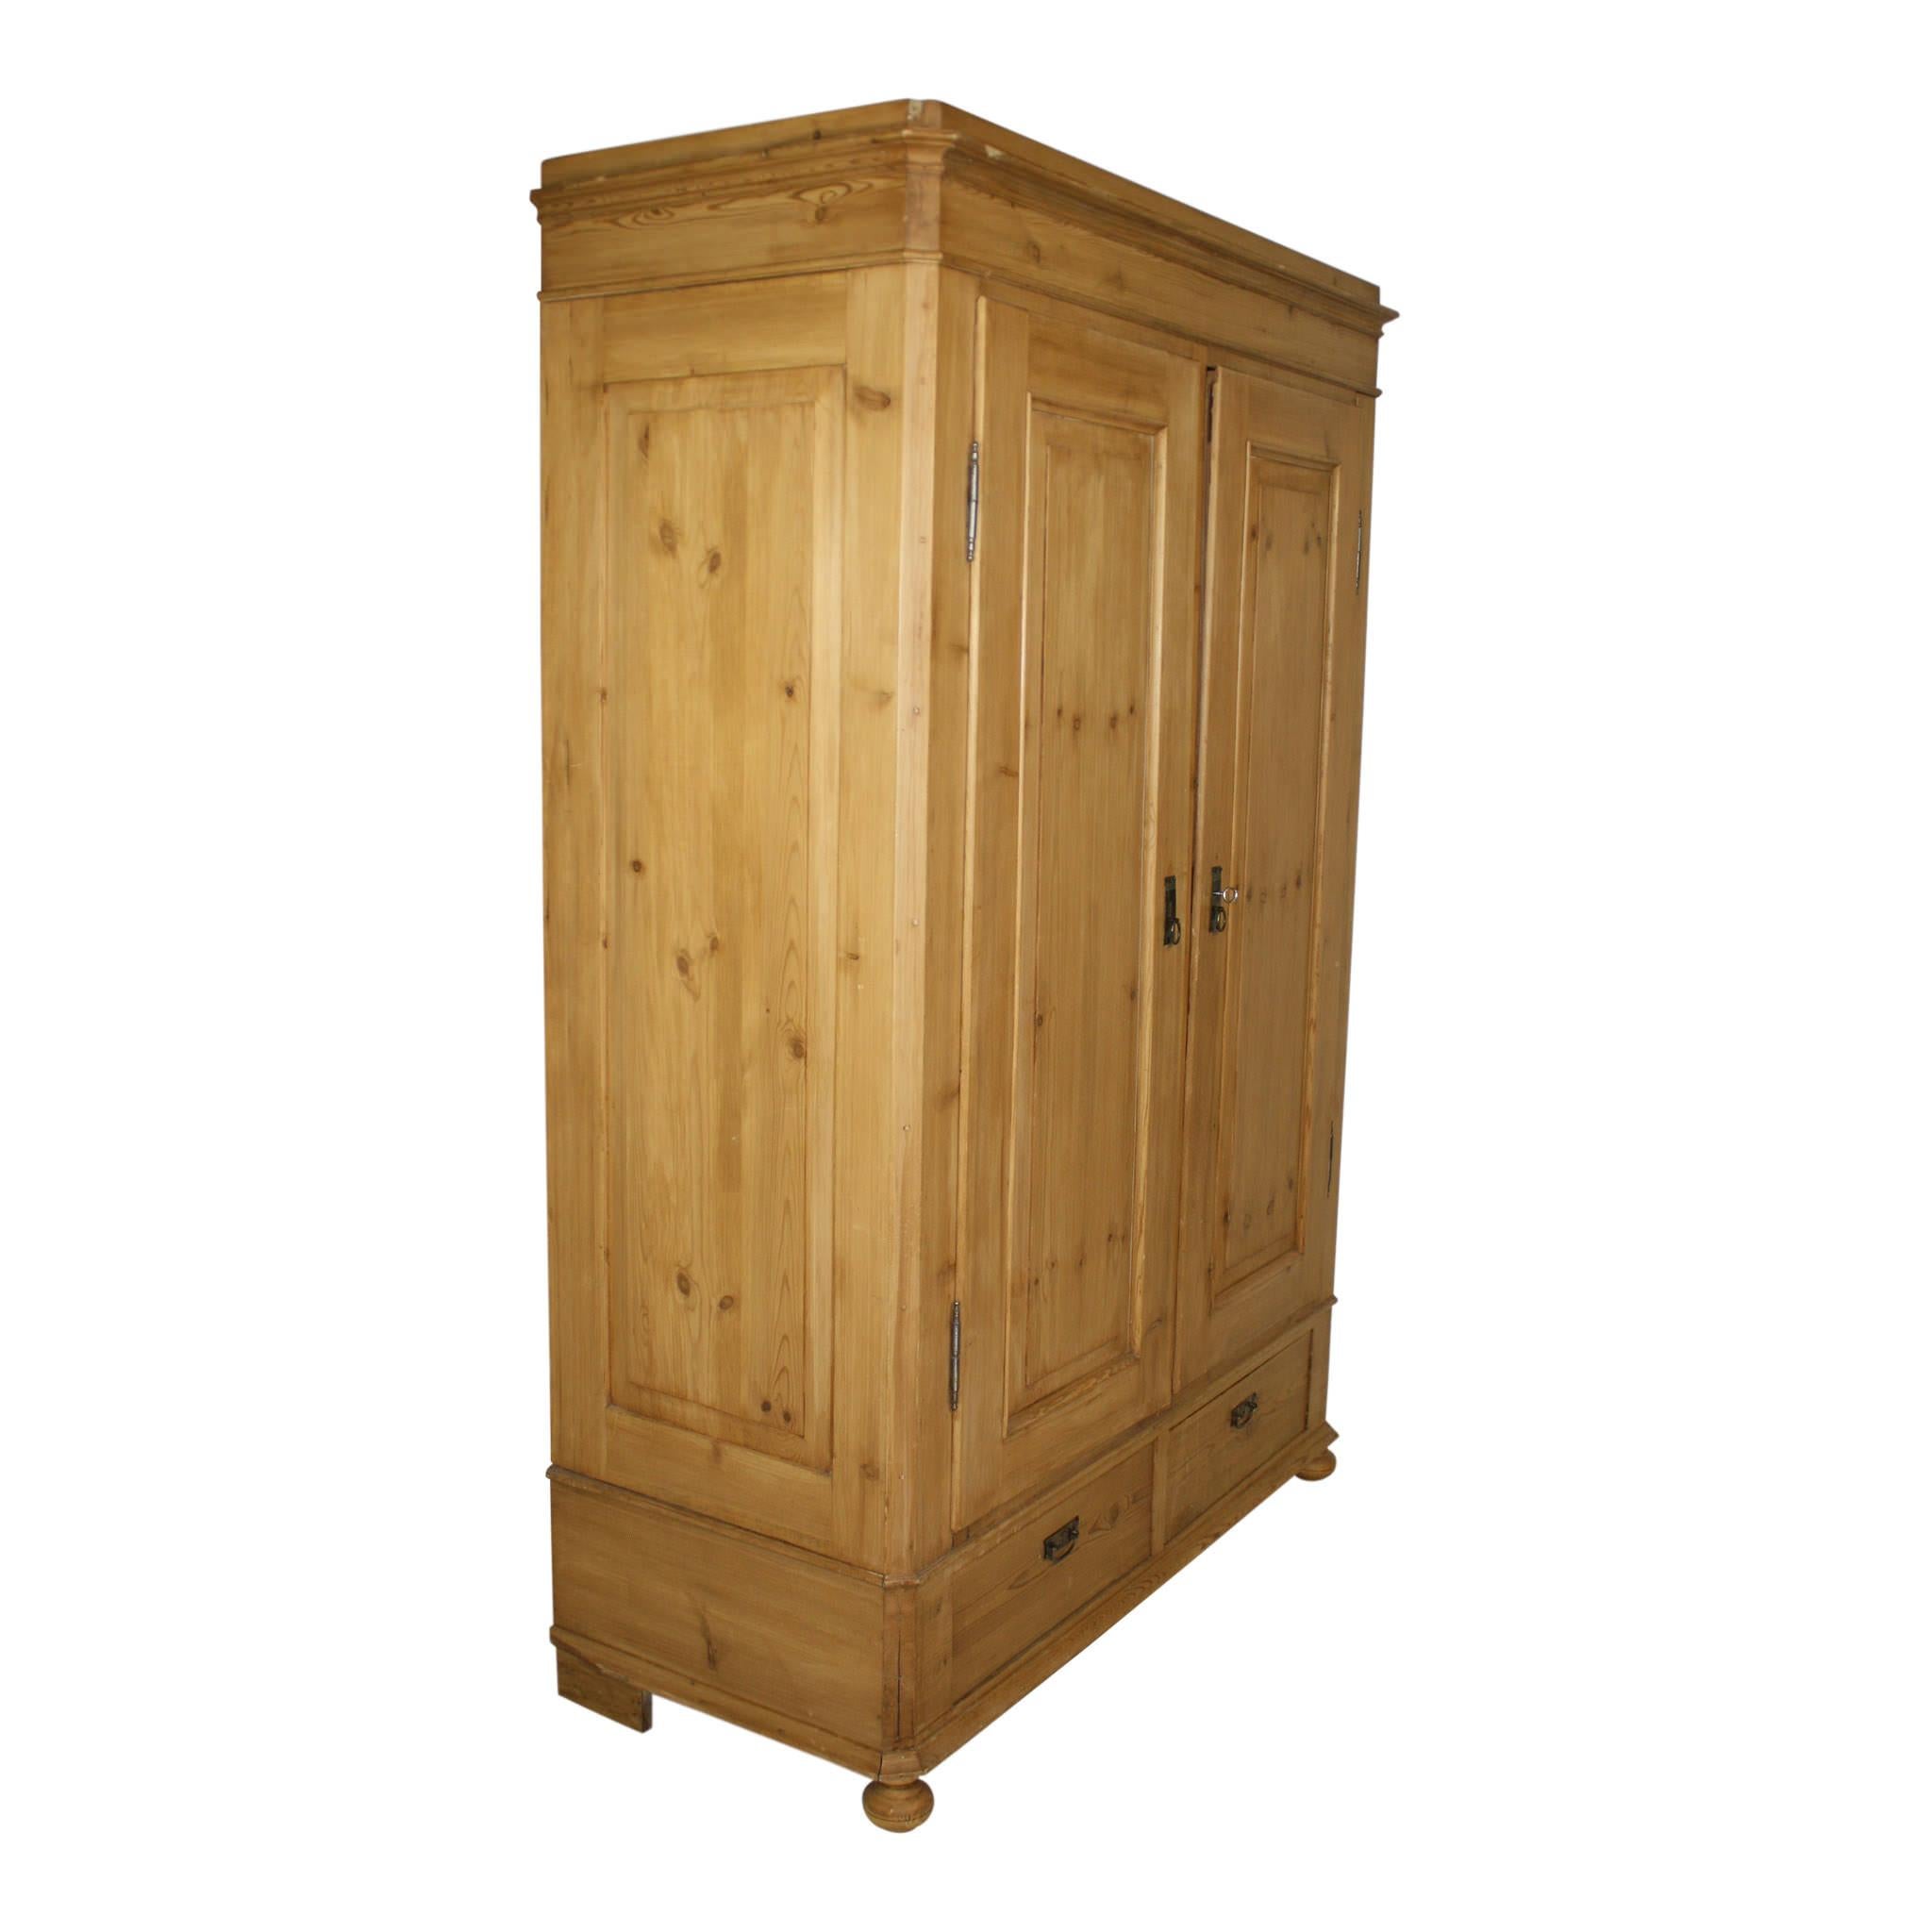 The simplicity of natural pine paired with a large footprint gives this armoire a look that is both warm and stately. Double doors open to a unique design of pegs along the back, sides, and crossbar. Two lower drawers provide additional storage. The